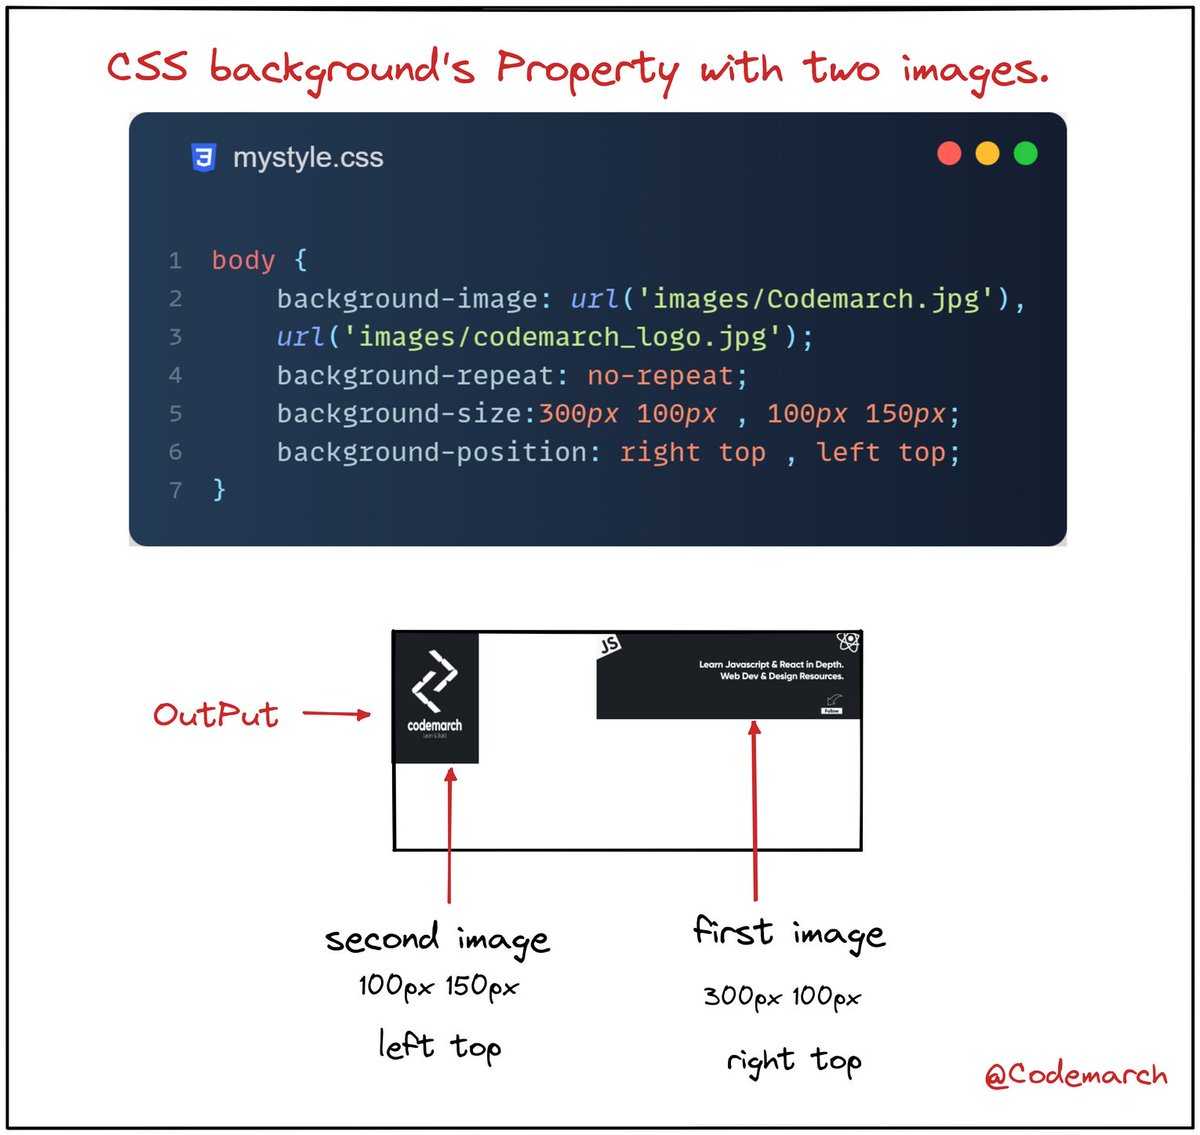 Learn CSS Backgrounds Visually Explained? Mega Thread ? - Thread from  codemarch @codemarch - Rattibha